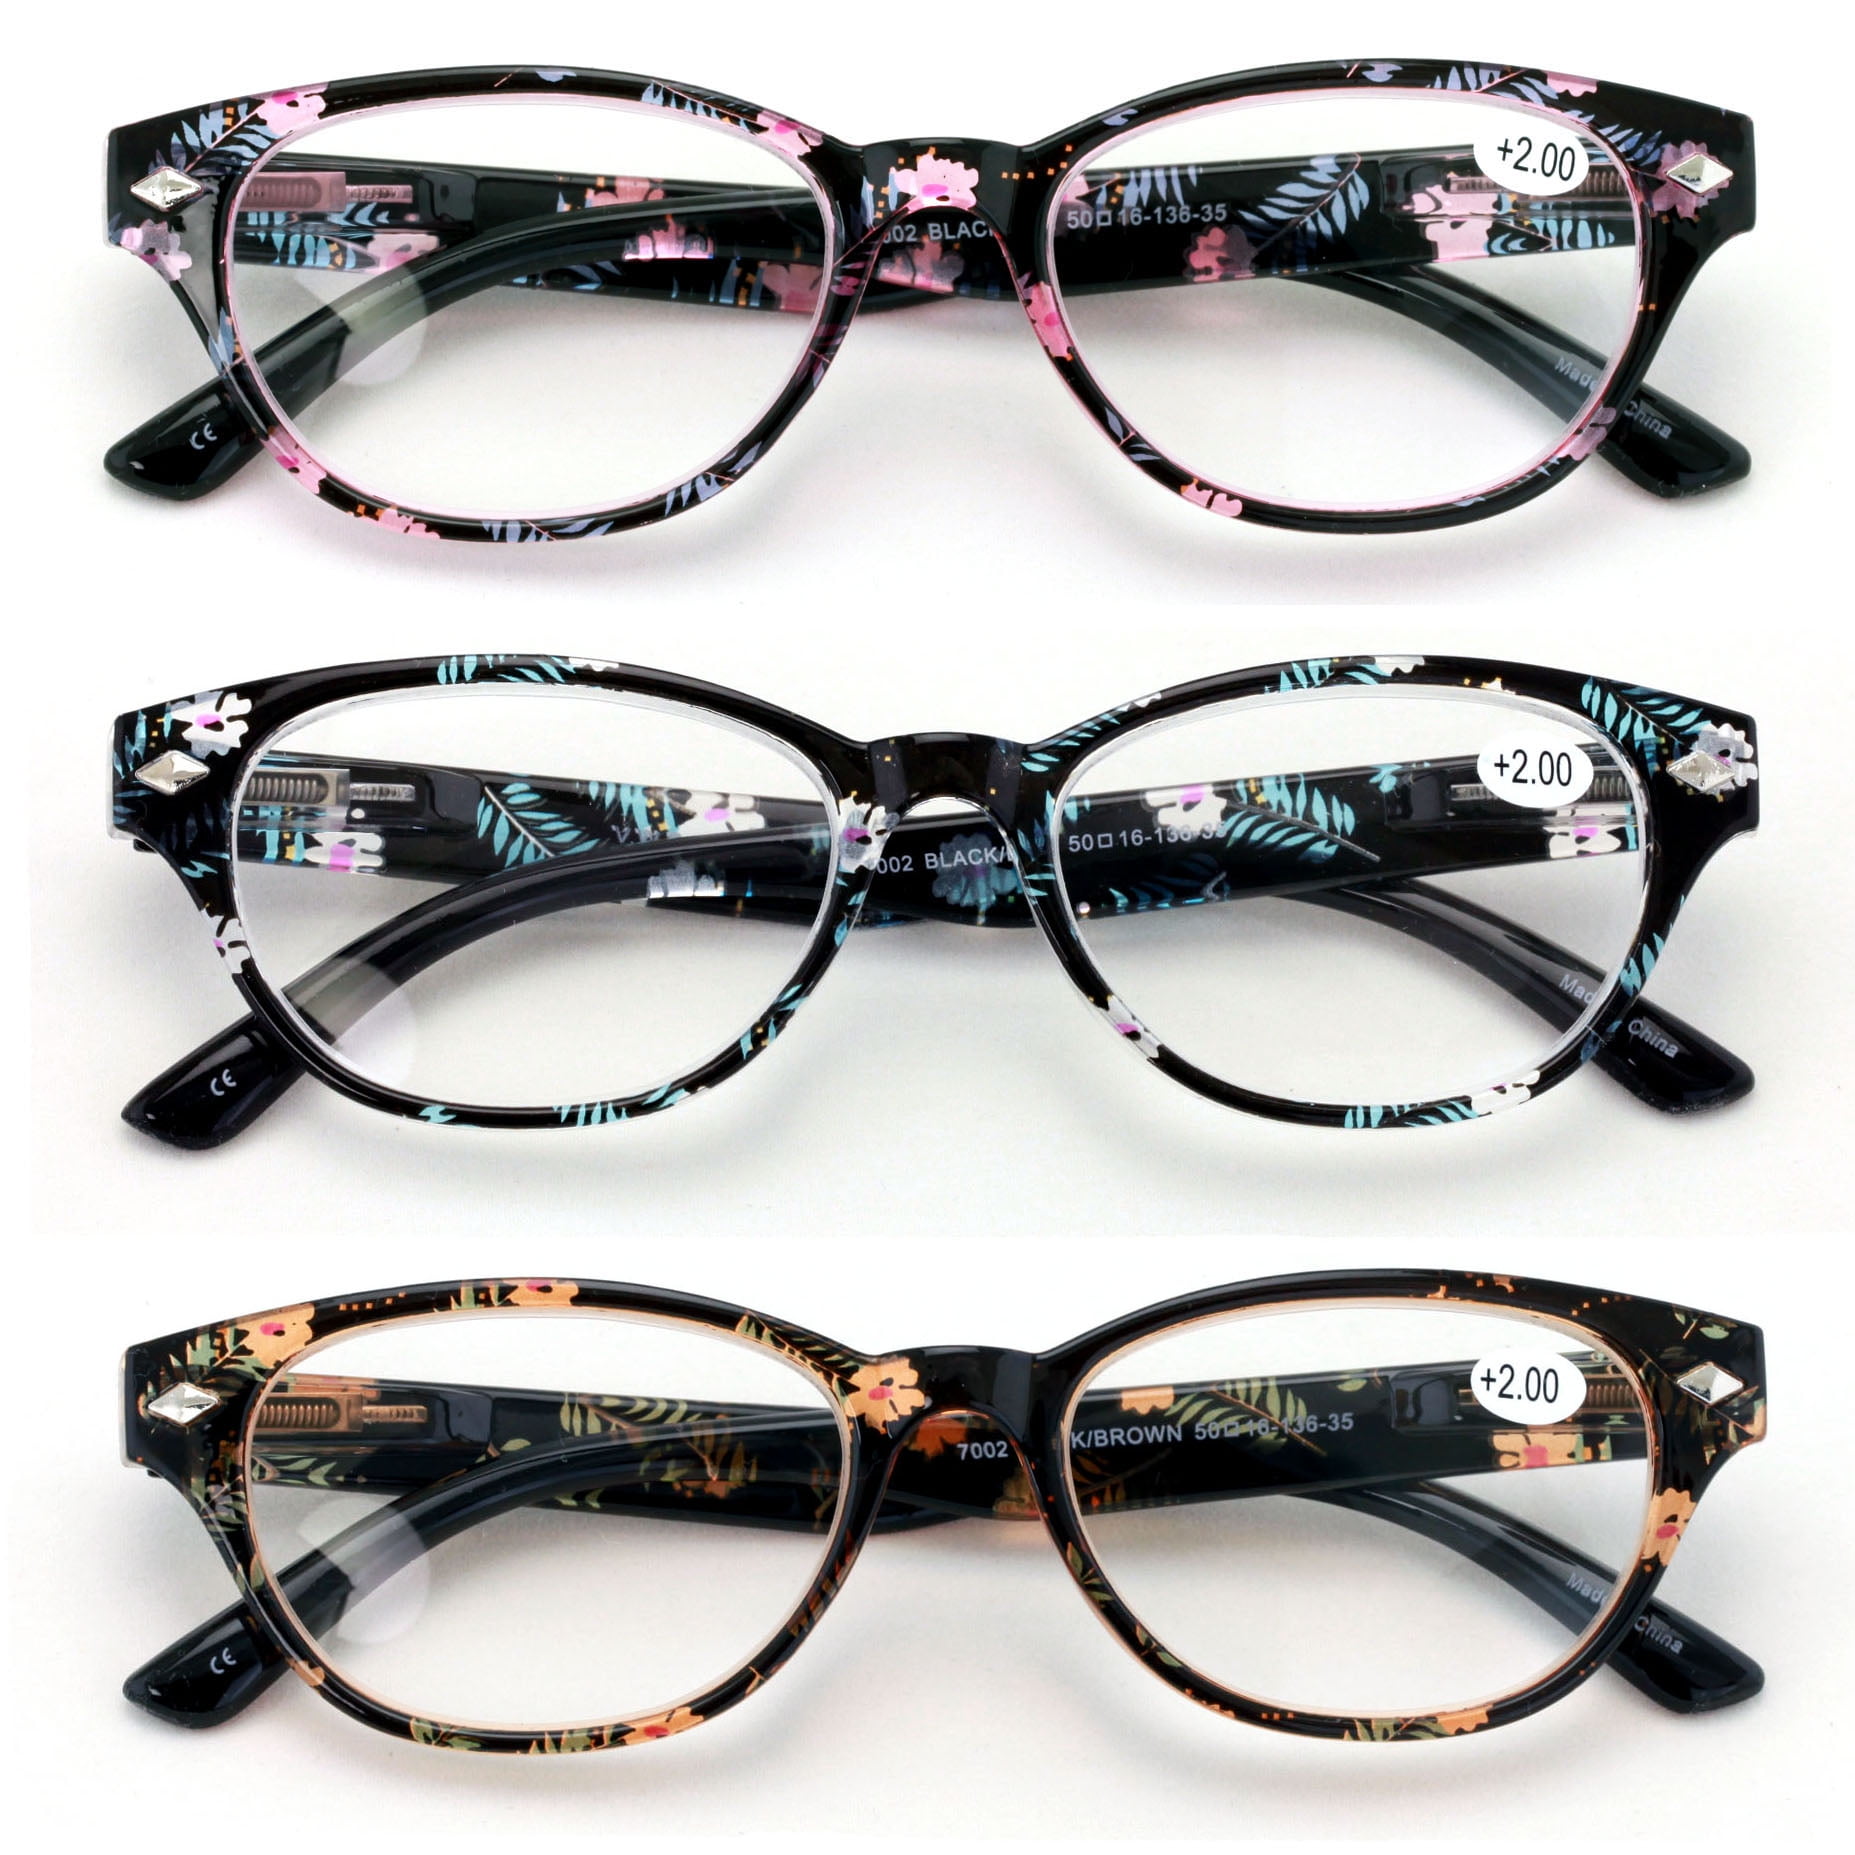 3 Pairs Women Classic Floral Readers With Spring Hinge - Oval Reading ...